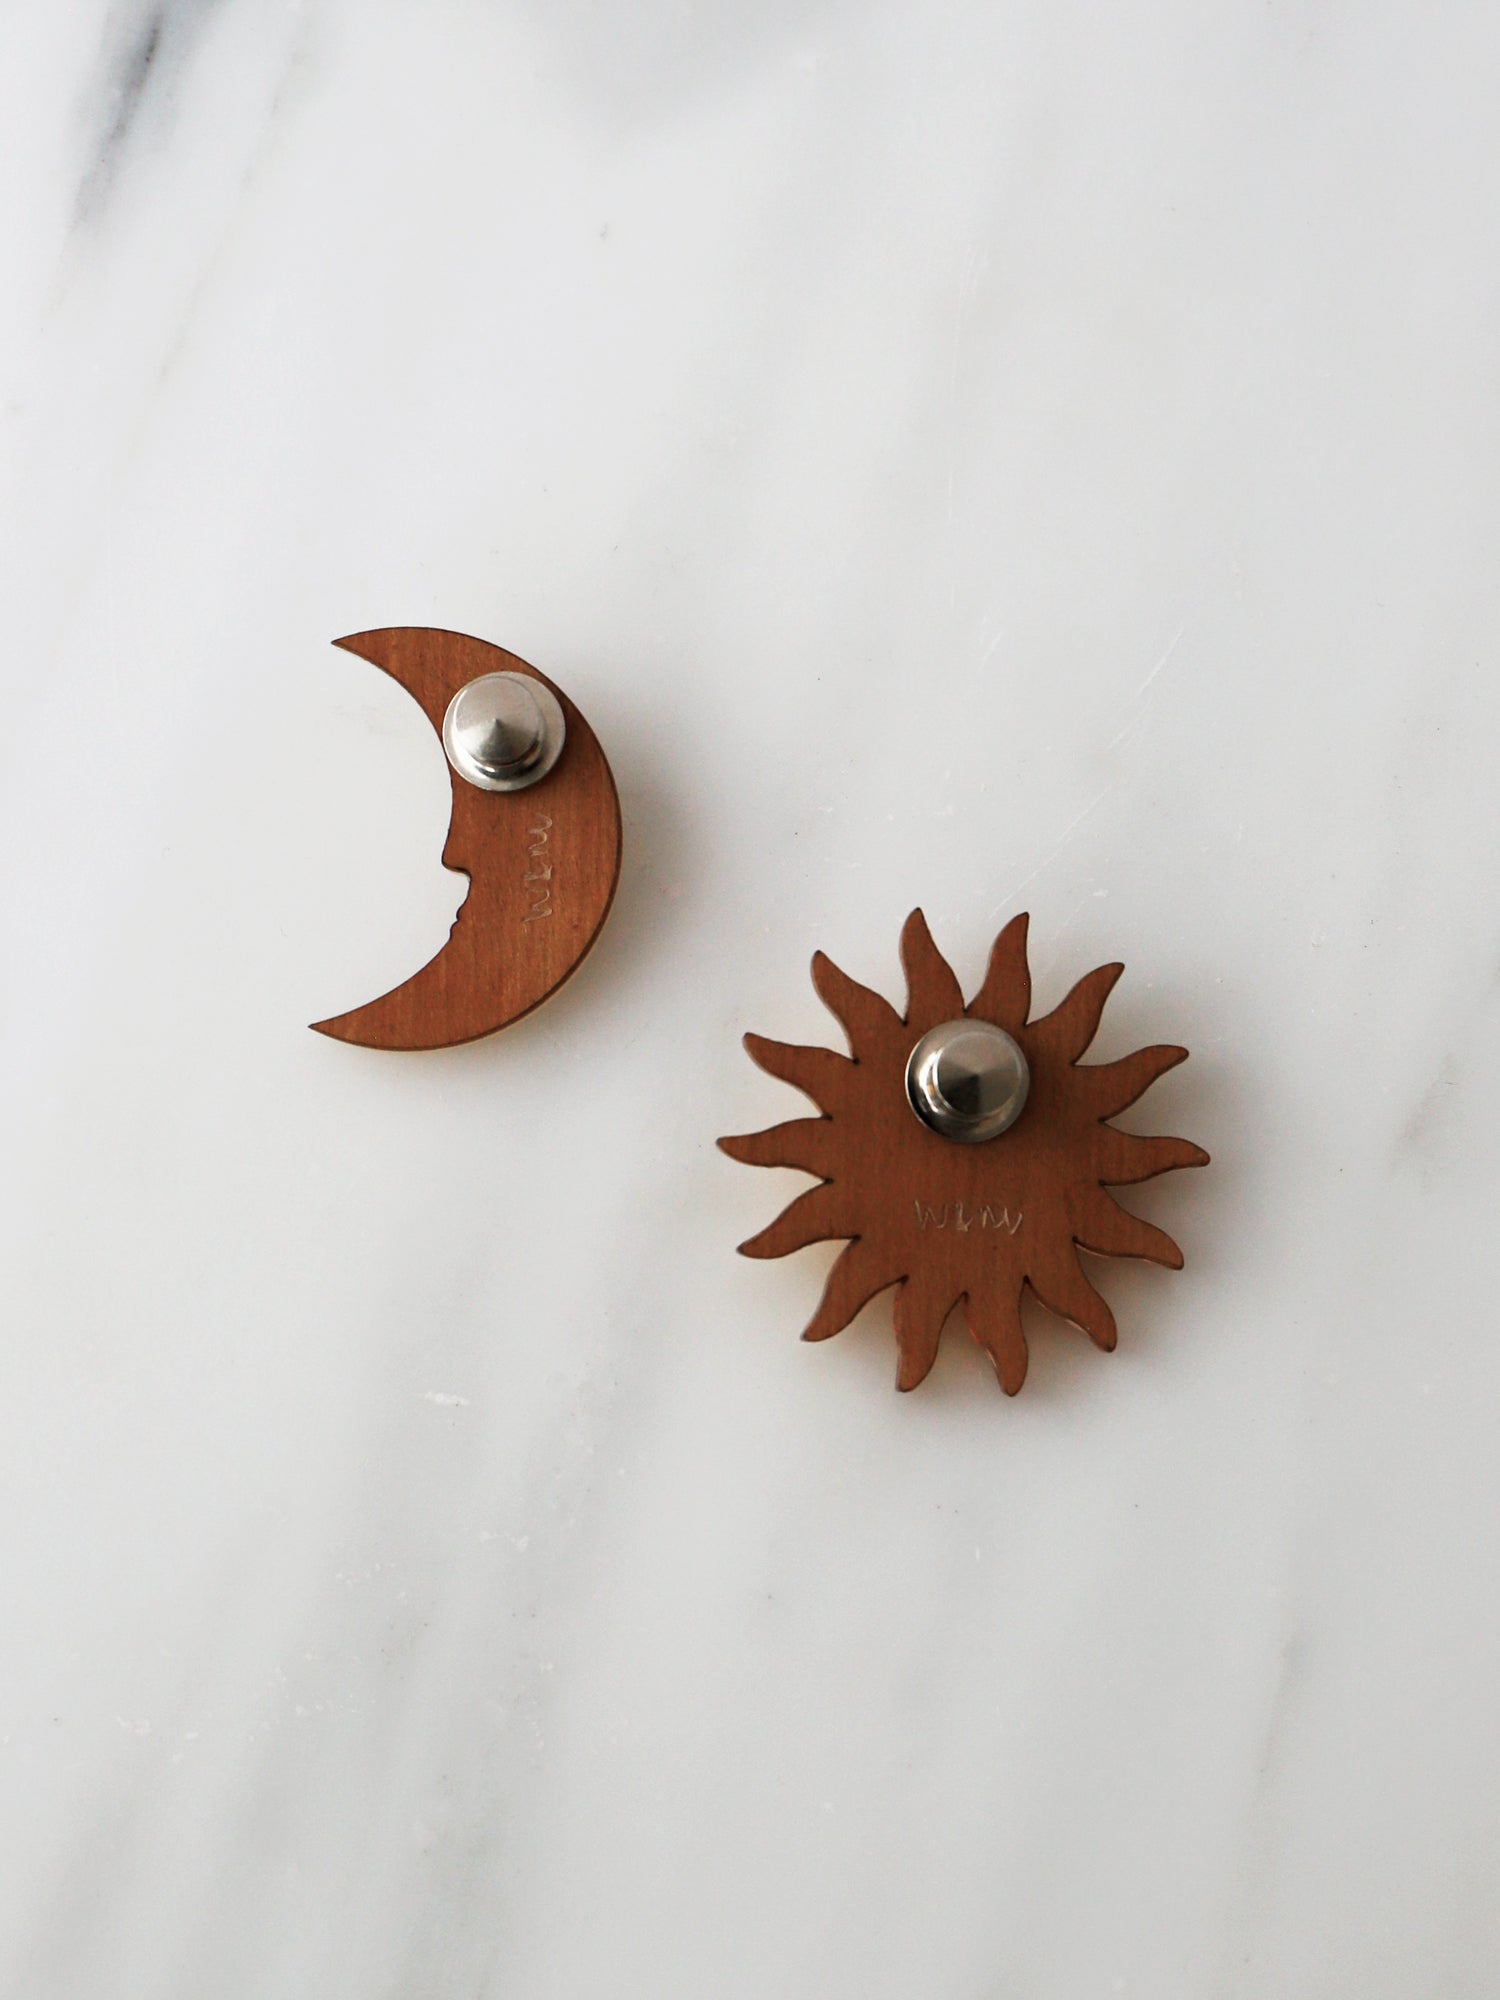 Sun & Moon Brooch Set. 2 brooches made with laser cut acrylic, Czech glass pearls and hand inked details. Handmade in the UK by Wolf & Moon.